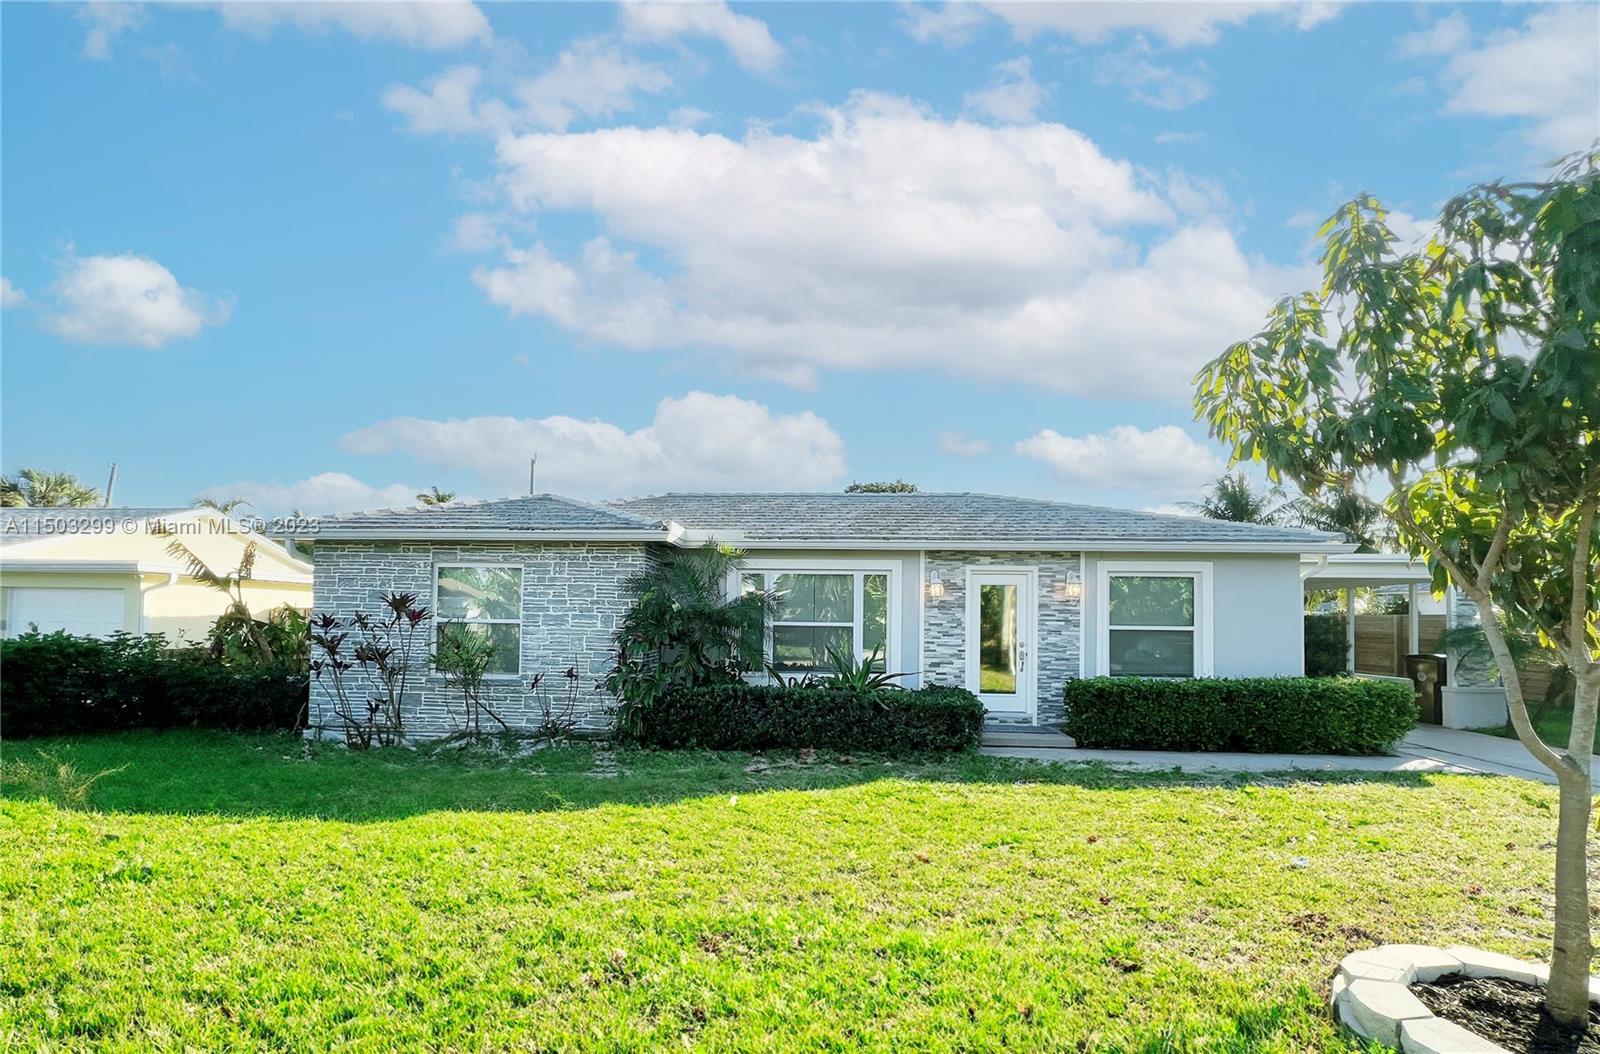 Experience this exquisite freshly updated 3 bedroom 2.5 bath single-family home in West Palm Beach. 